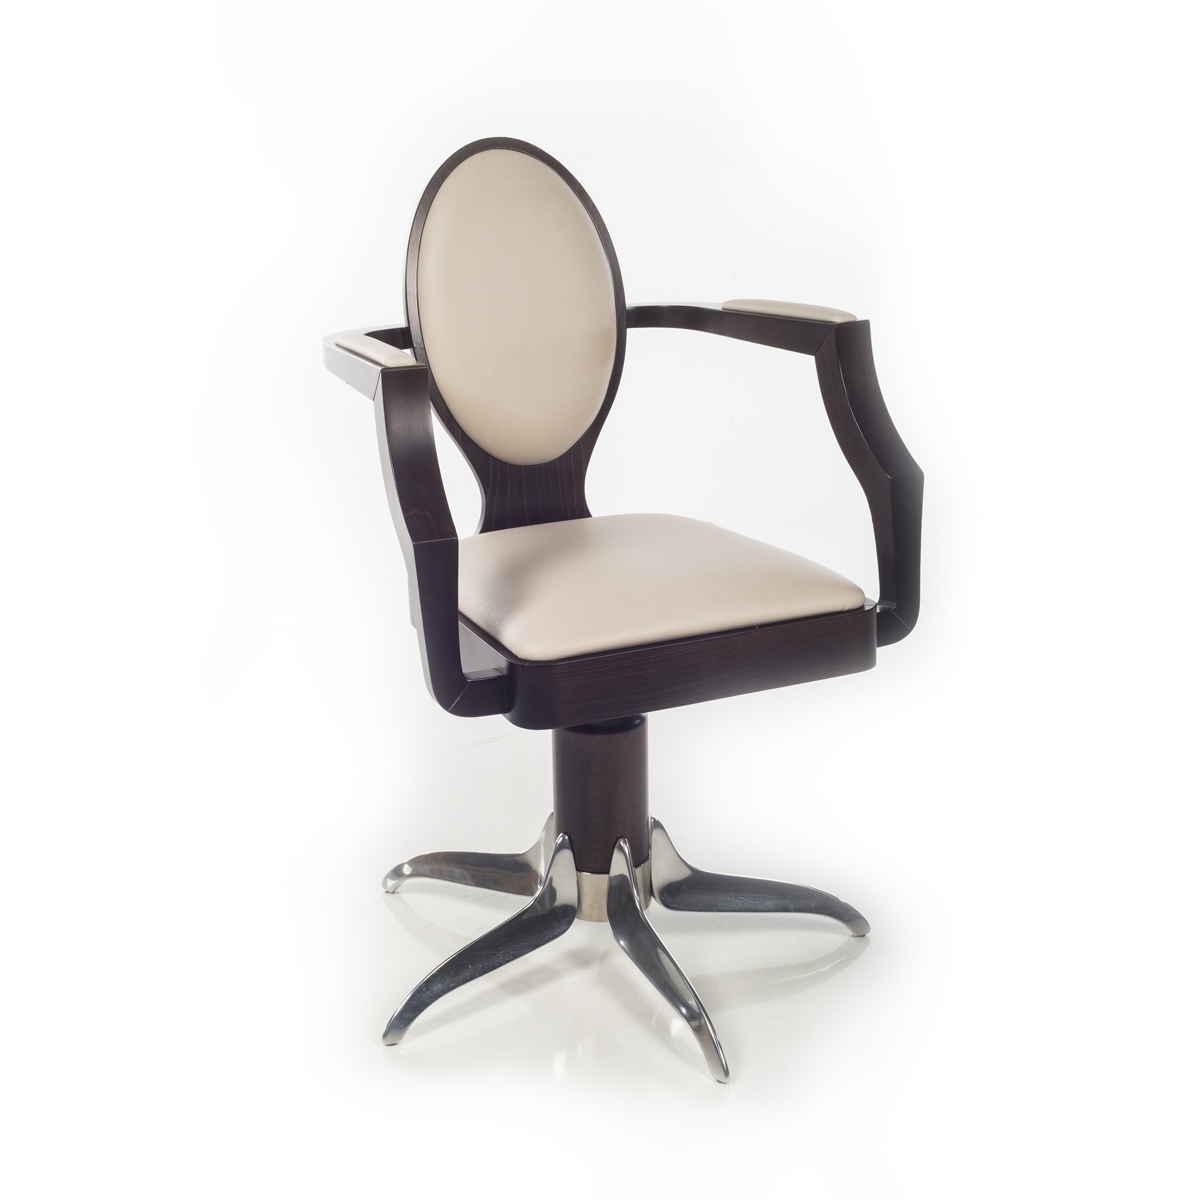 Louis 8 Styling Chair by Gamma & Bross Spa